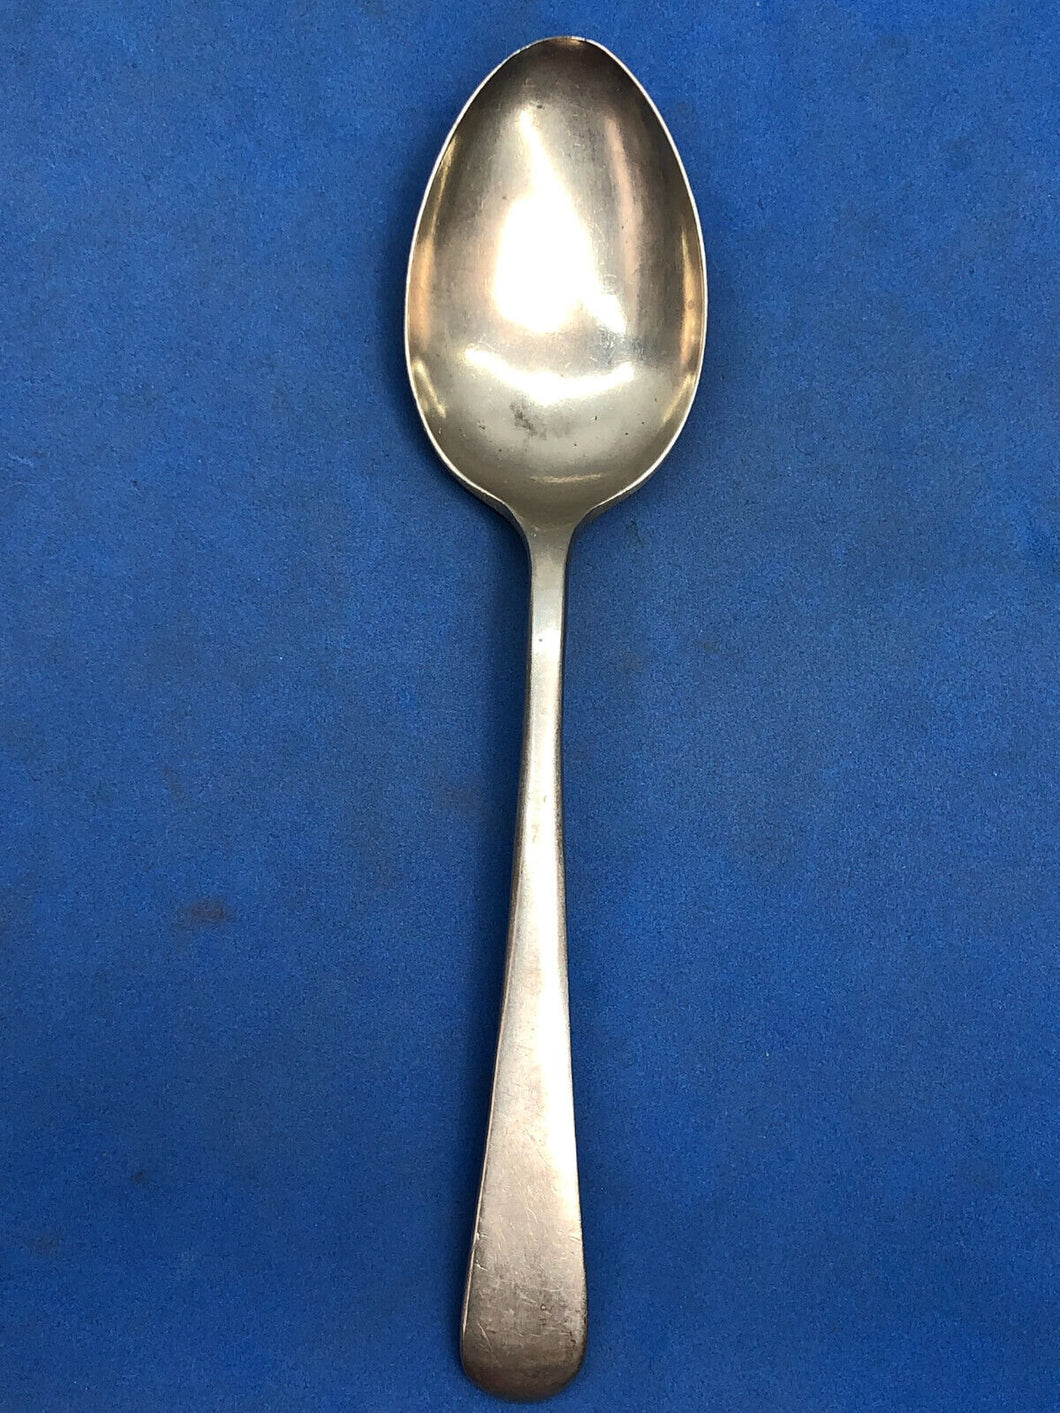 Original WW2 British Army Officers Mess WD Marked Cutlery Spoon - 1939 Dated